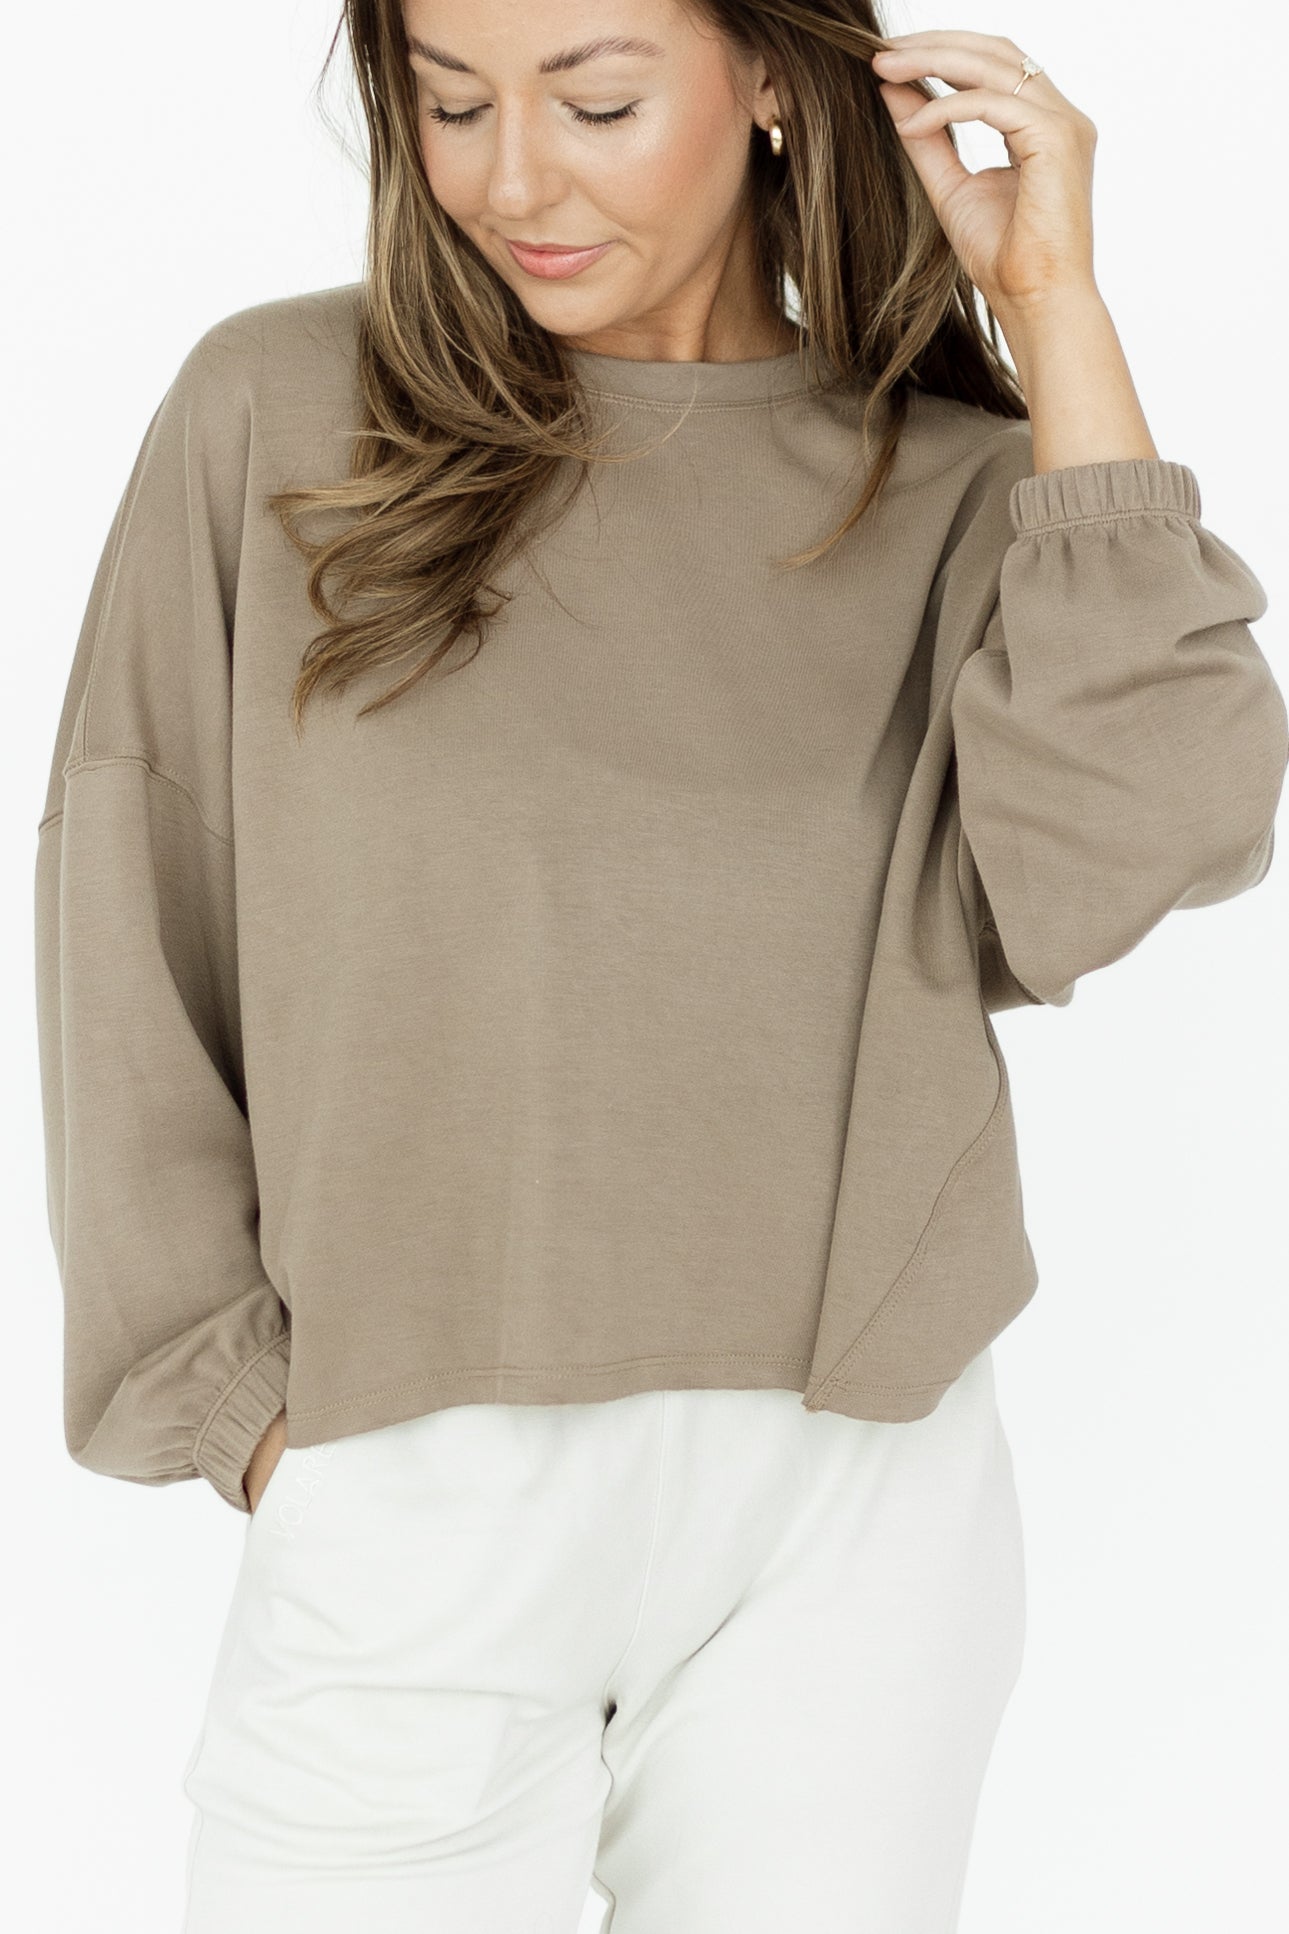 Tan Pullover with Raw Hemline Soft aand Comfy with Bat Sleeves